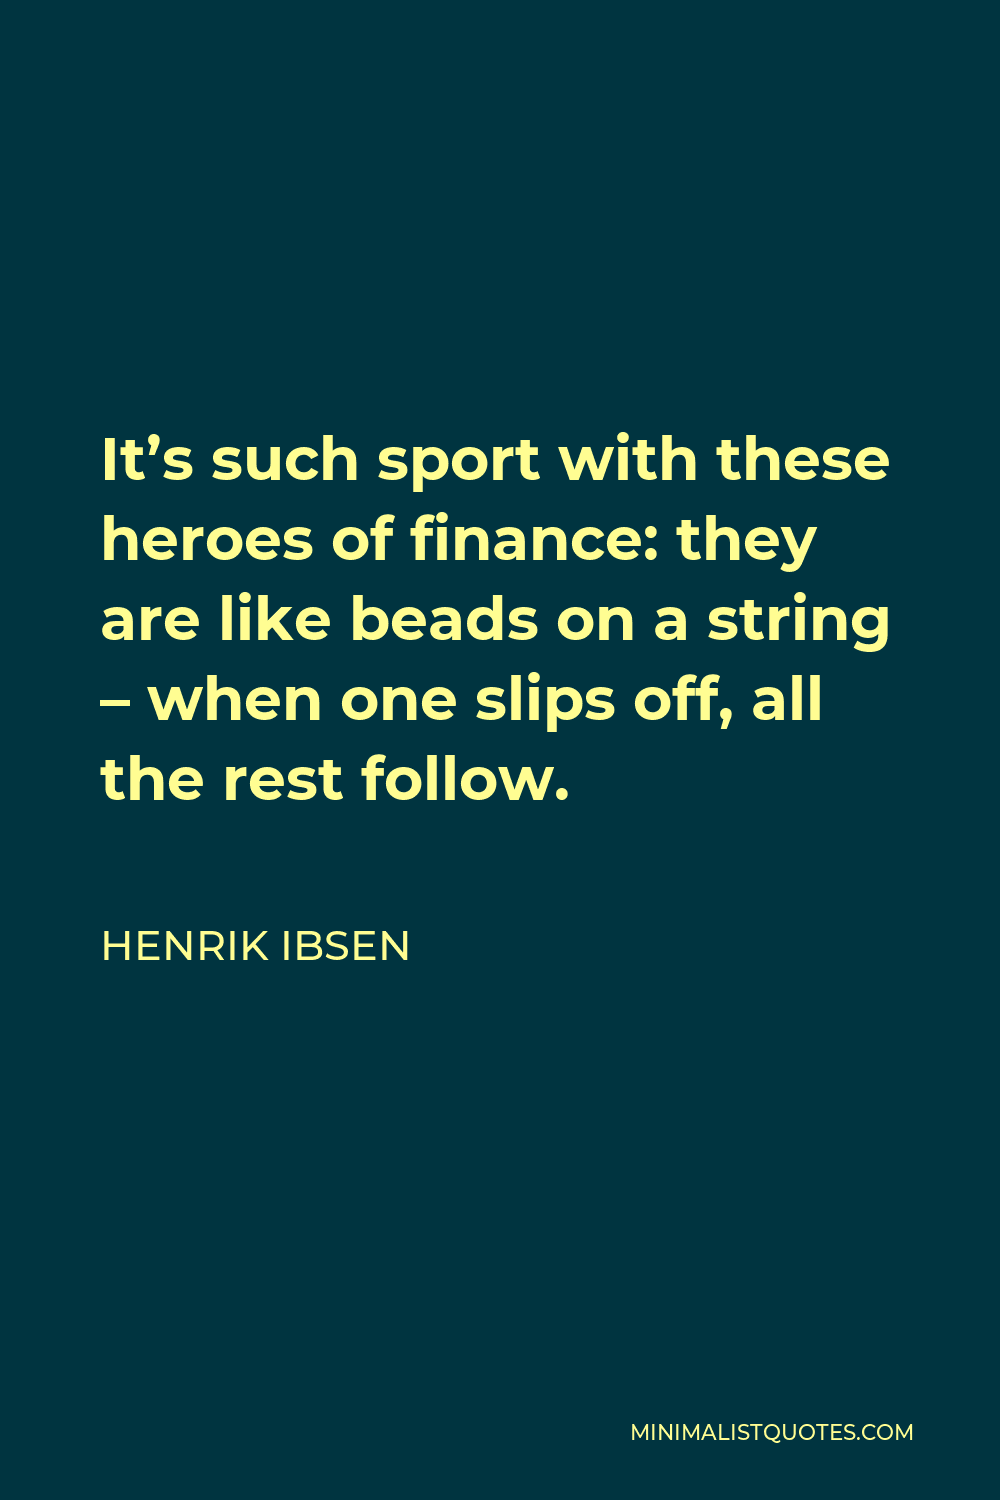 Henrik Ibsen Quote - It’s such sport with these heroes of finance: they are like beads on a string – when one slips off, all the rest follow.